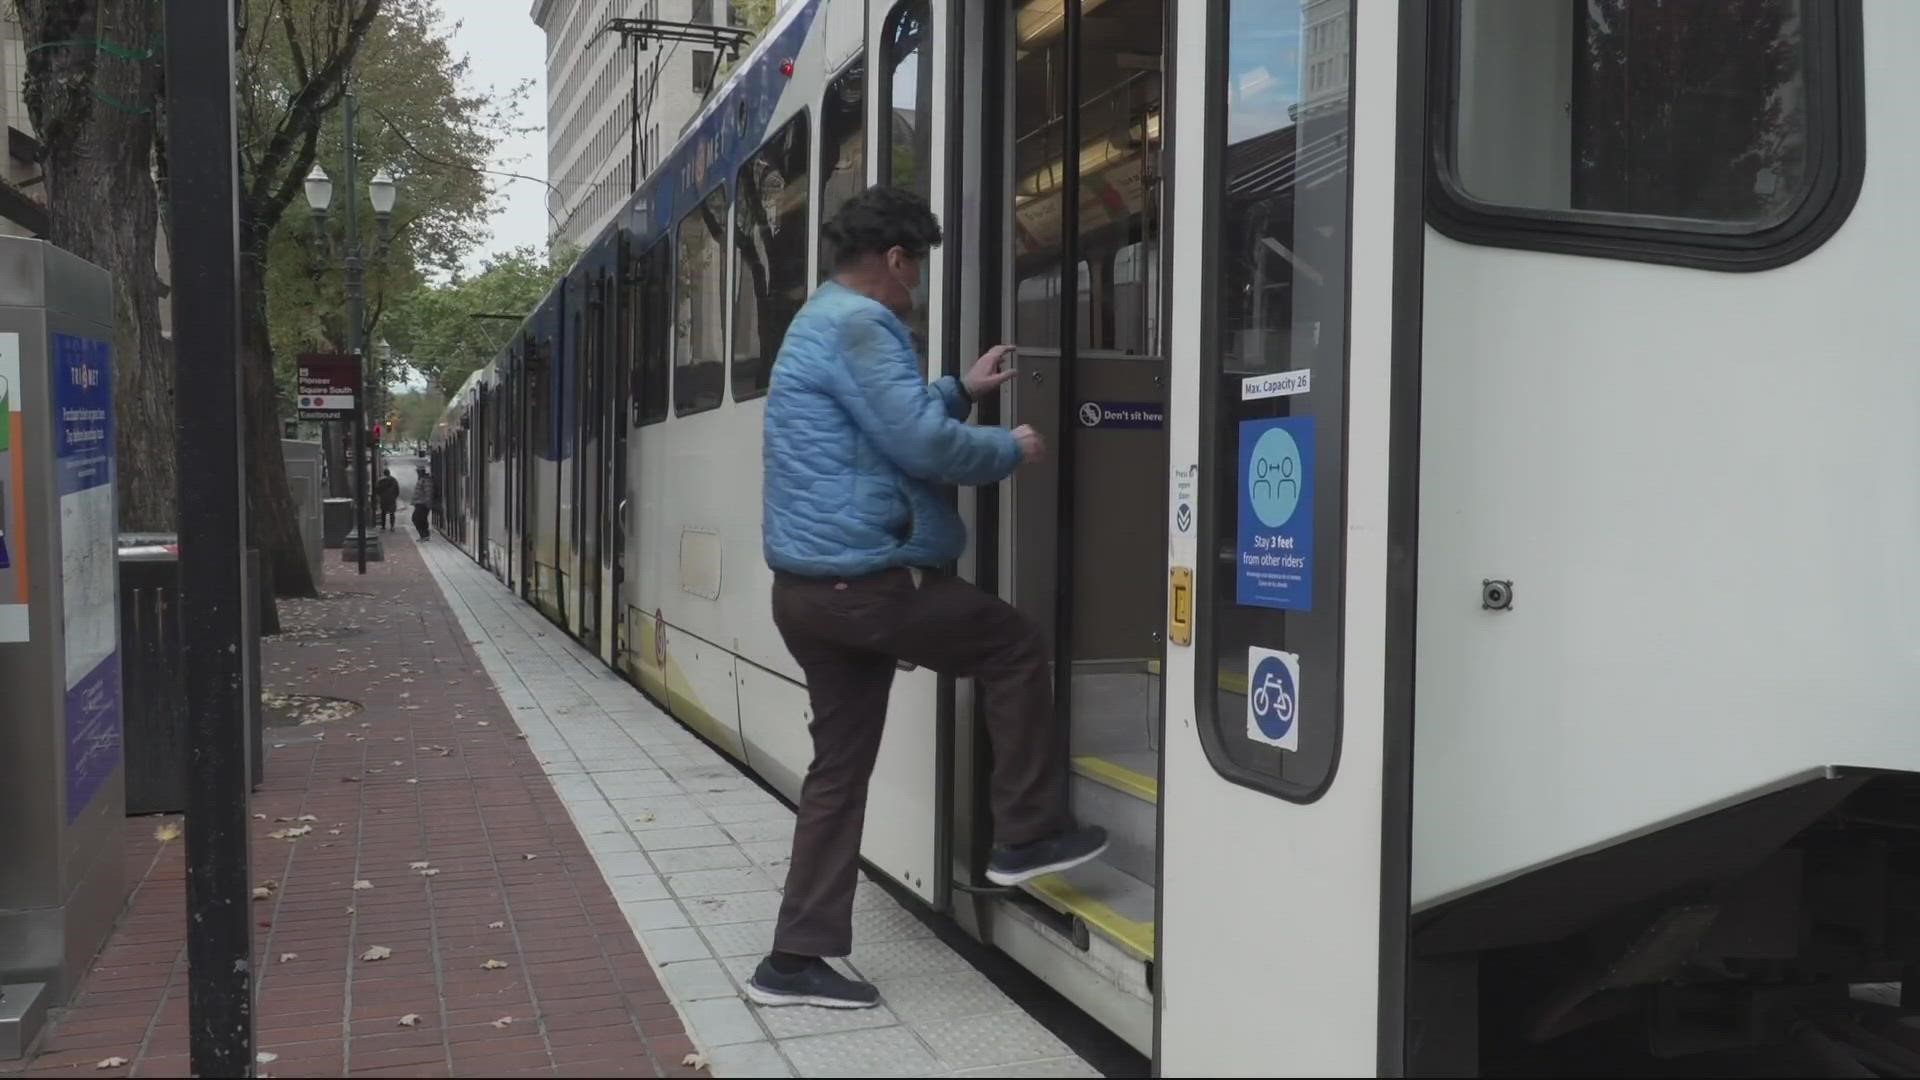 TriMet has not raised fare rates since 2012, but the agency says it can't hold off any longer amid rising operating costs.